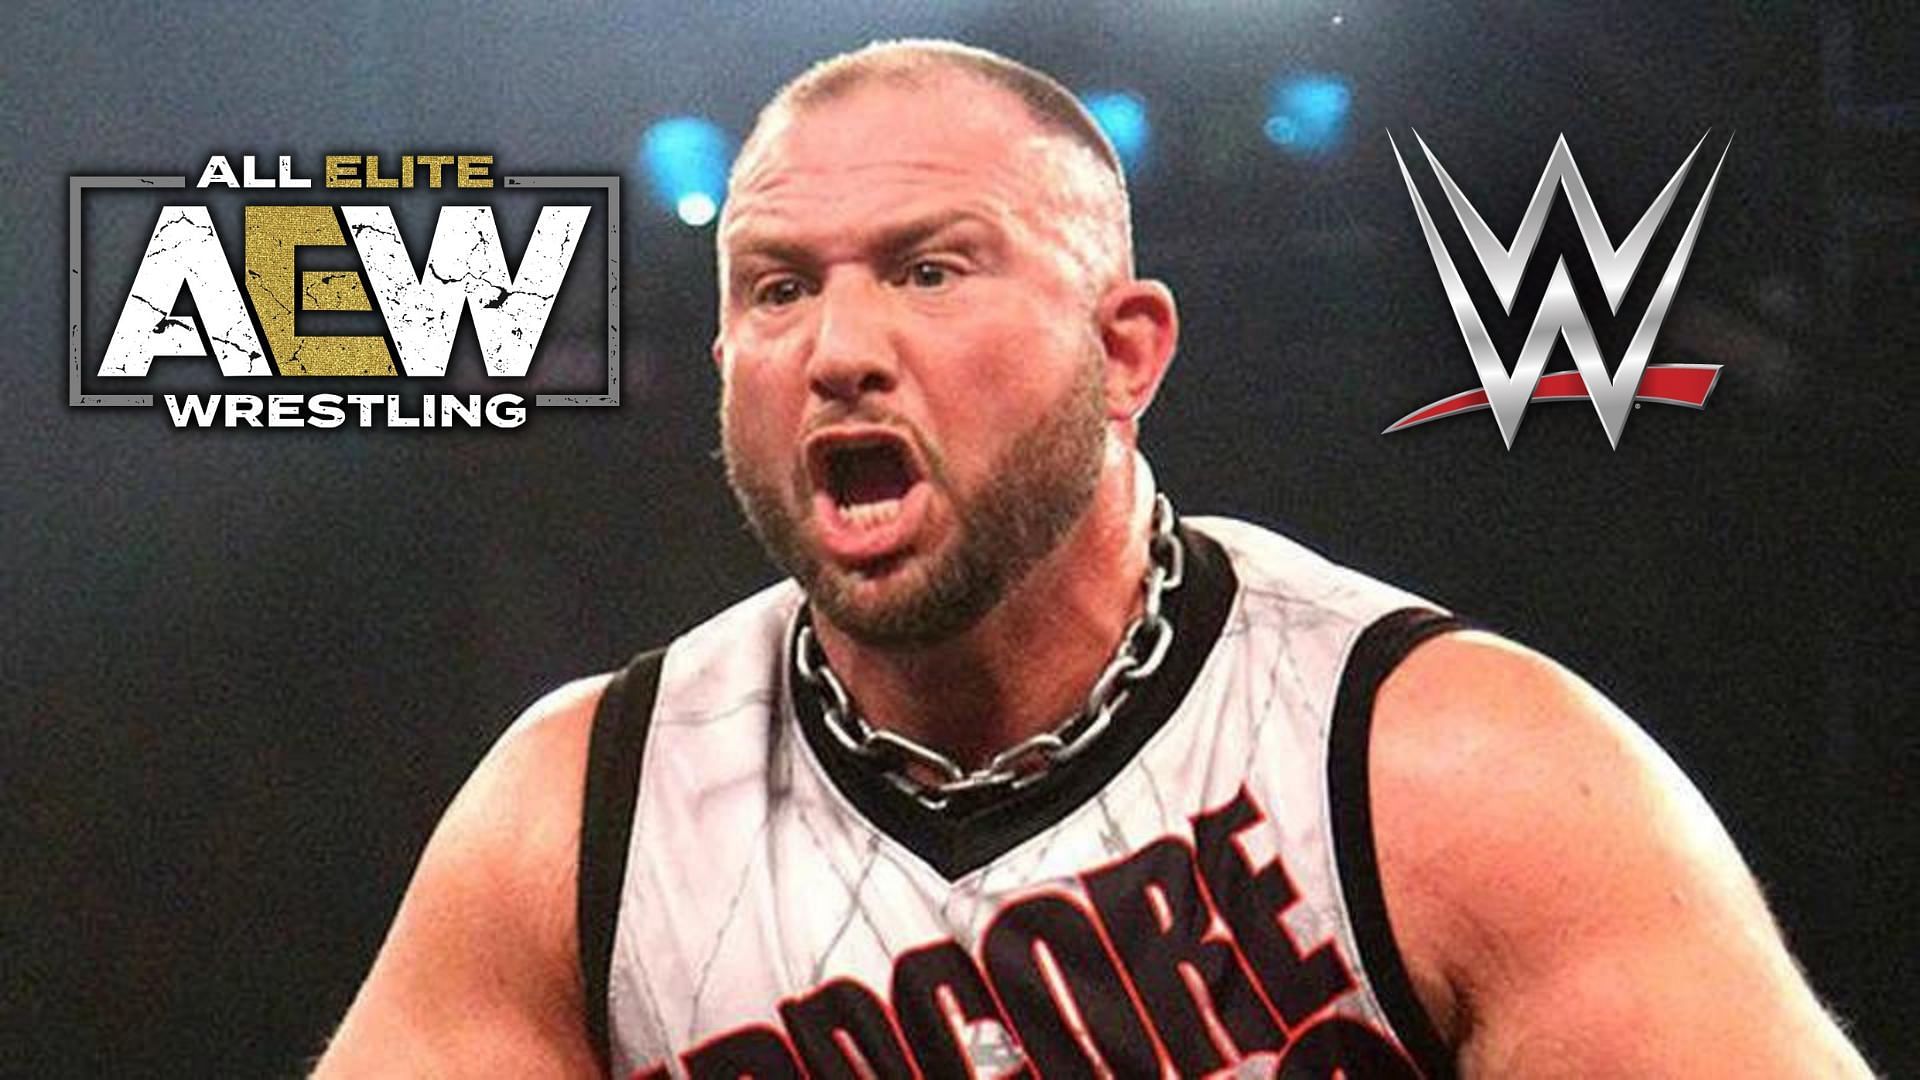 WWE legend Bully Ray seemingly takes a jibe at AEW during recent match